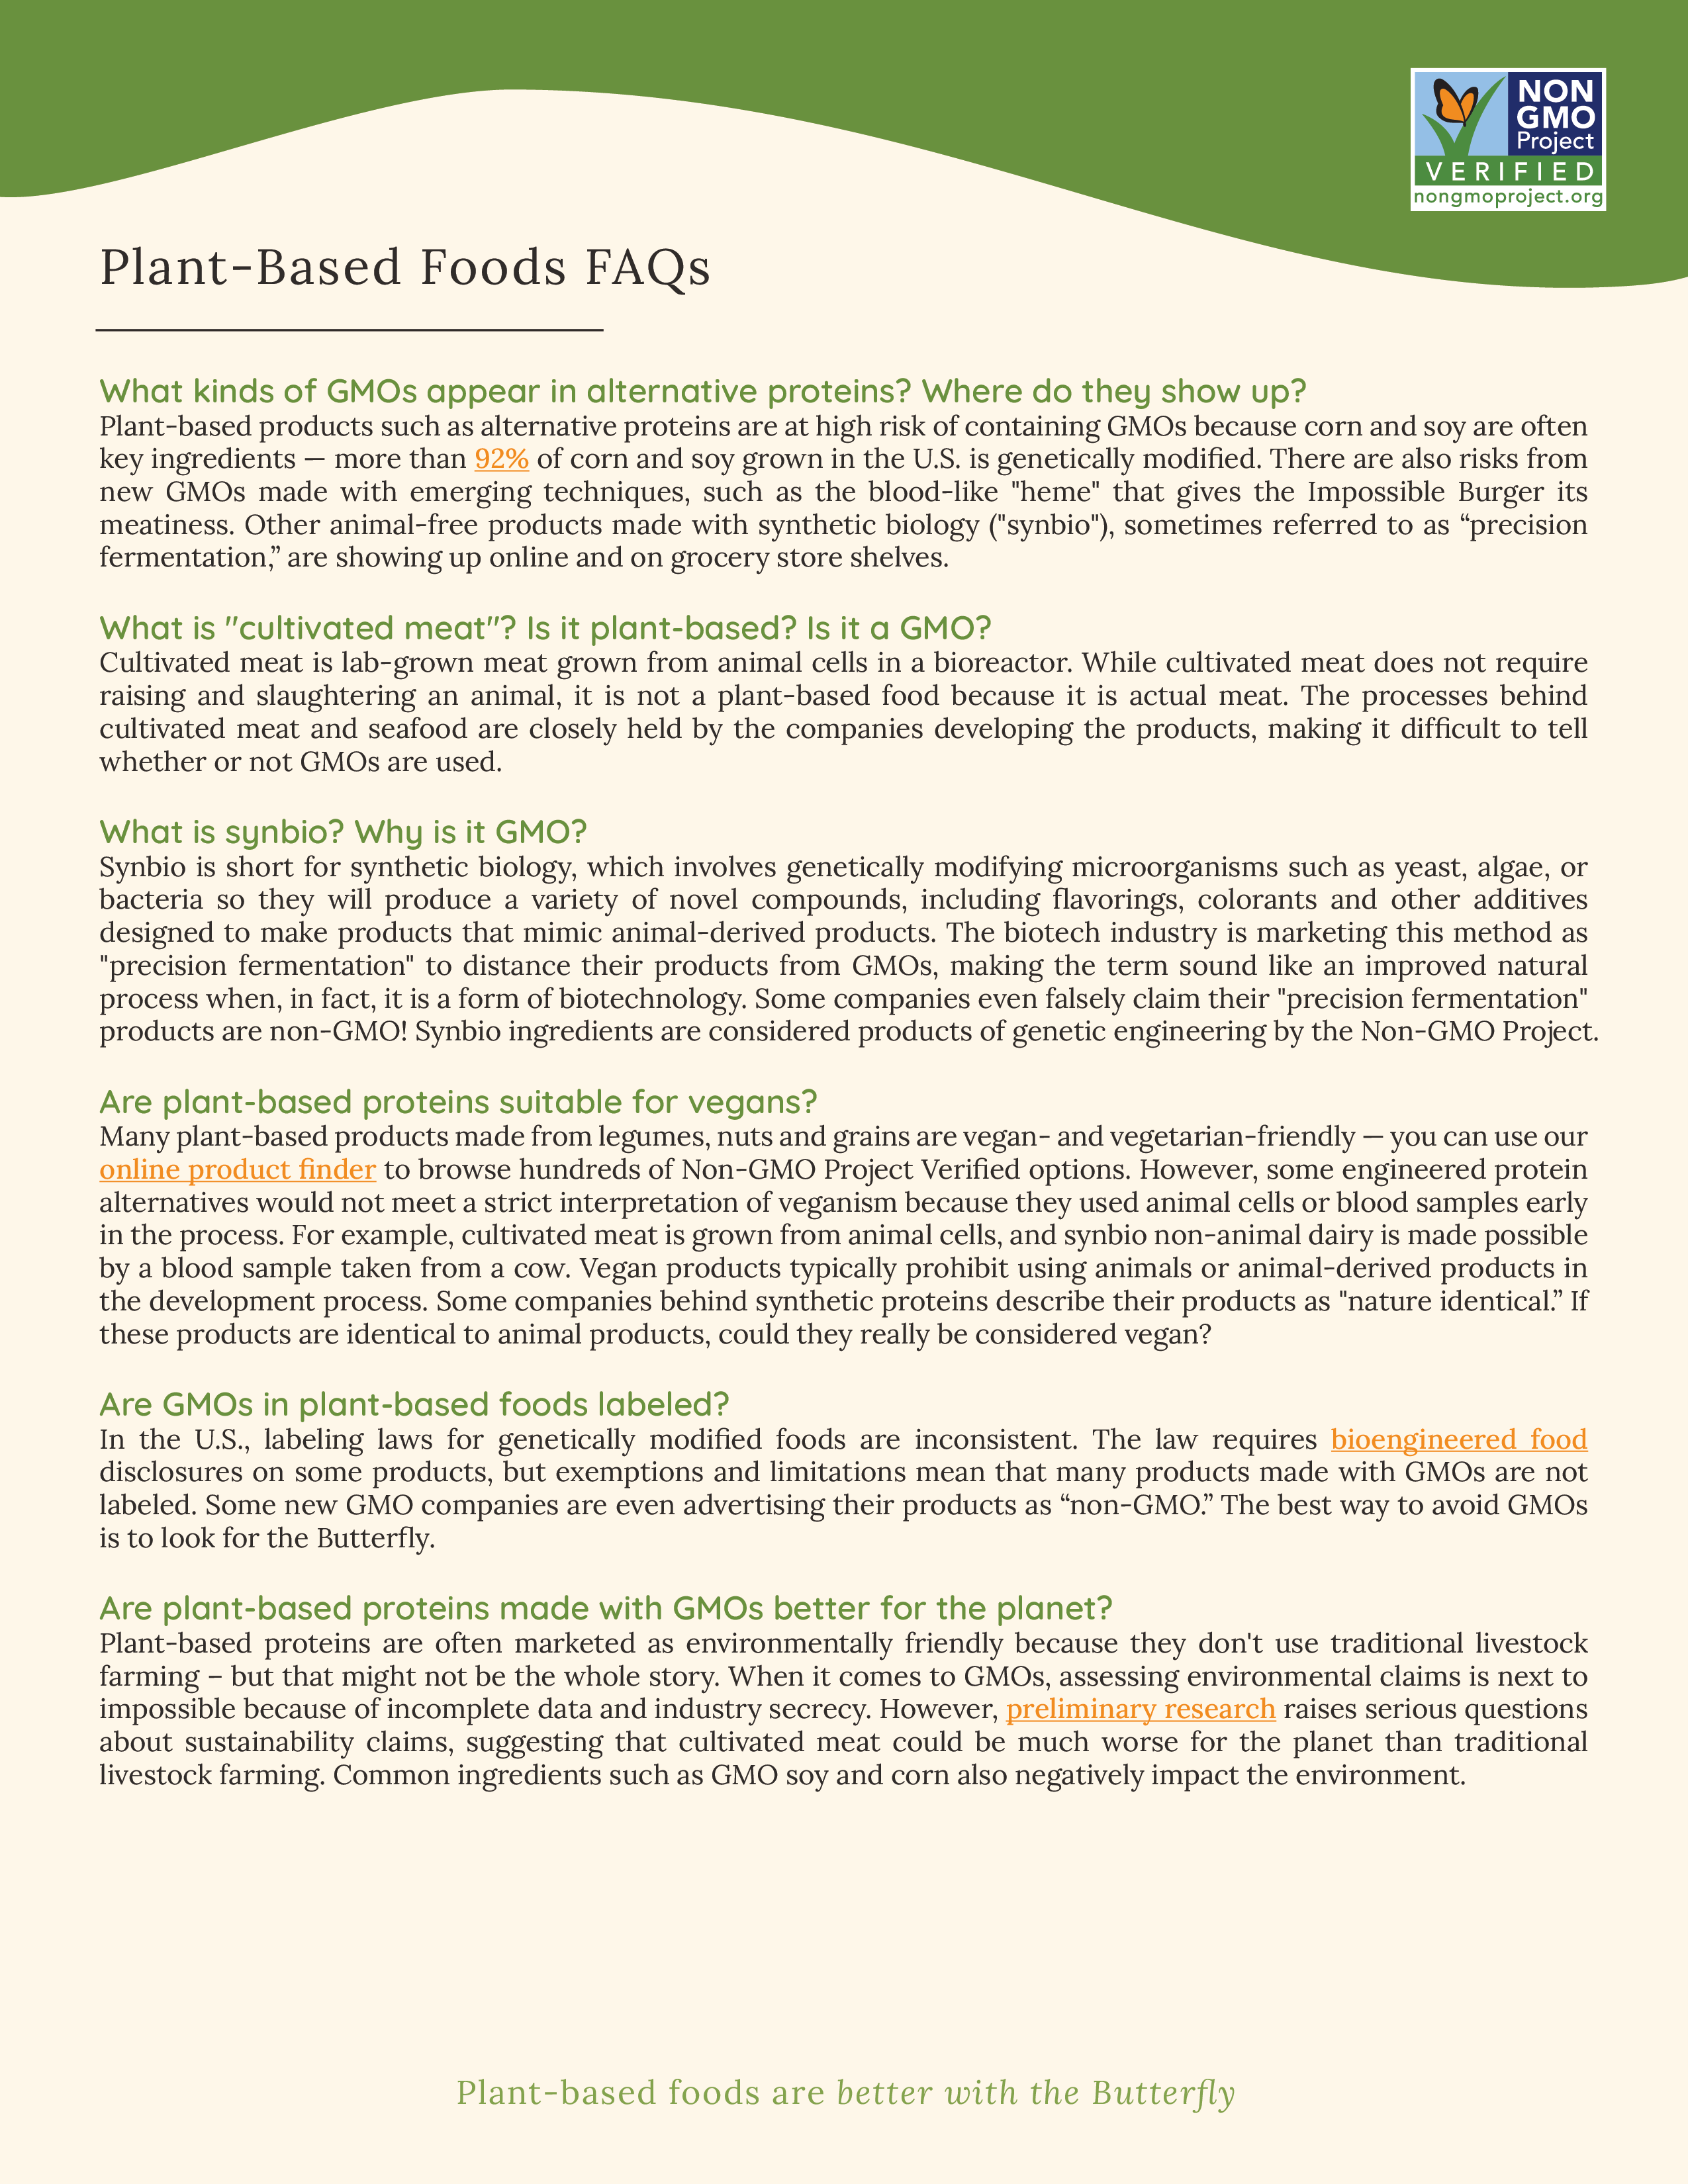 Plant-Based Foods 2023 FAQ document published by the Non-GMO Project